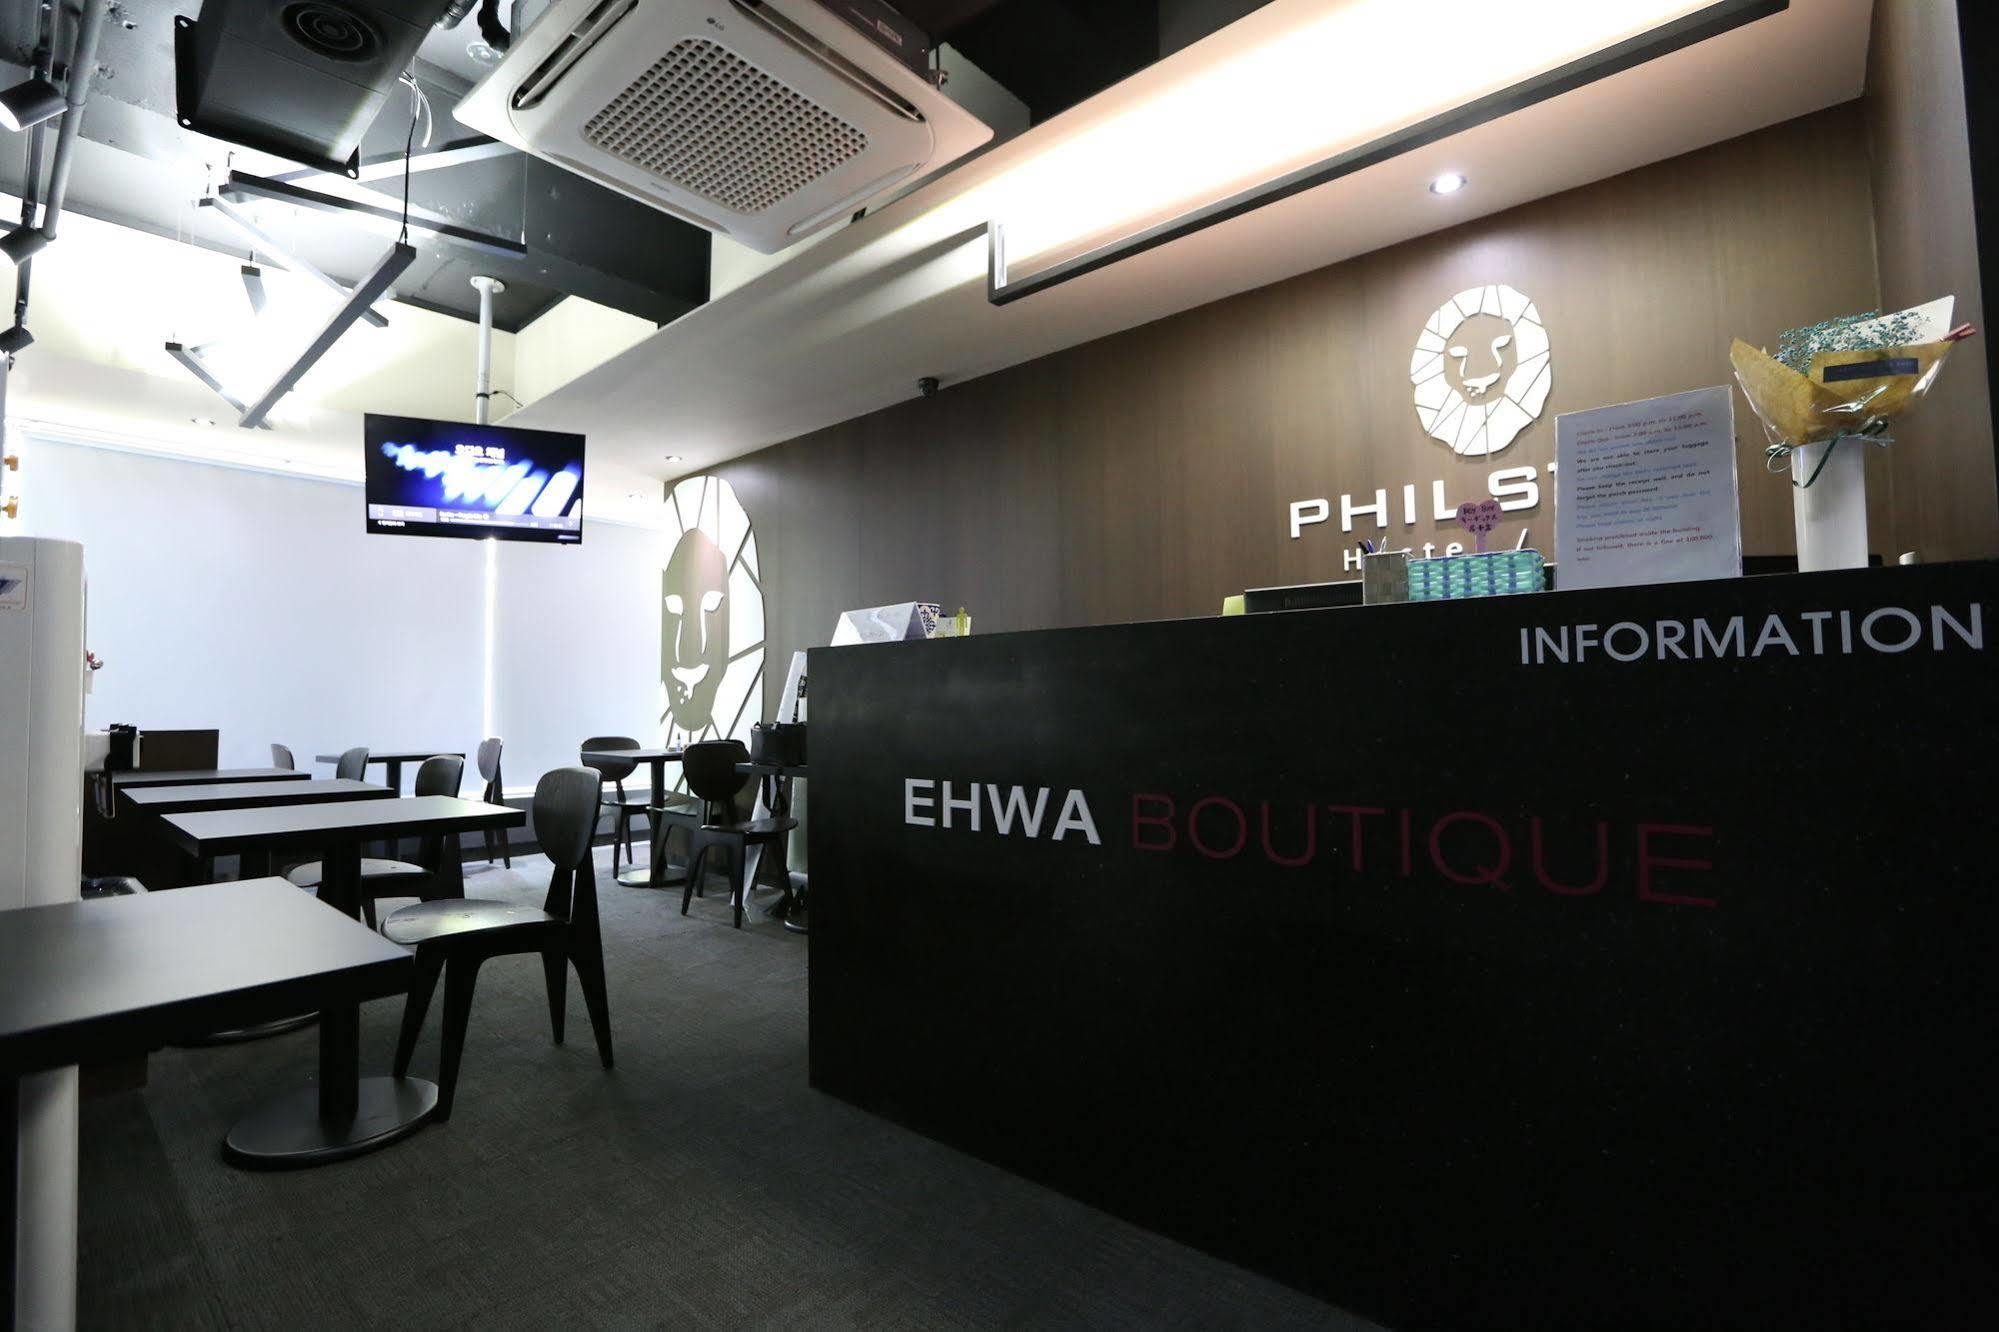 Philstay Ehwa Boutique - Female Only Seoul Bagian luar foto